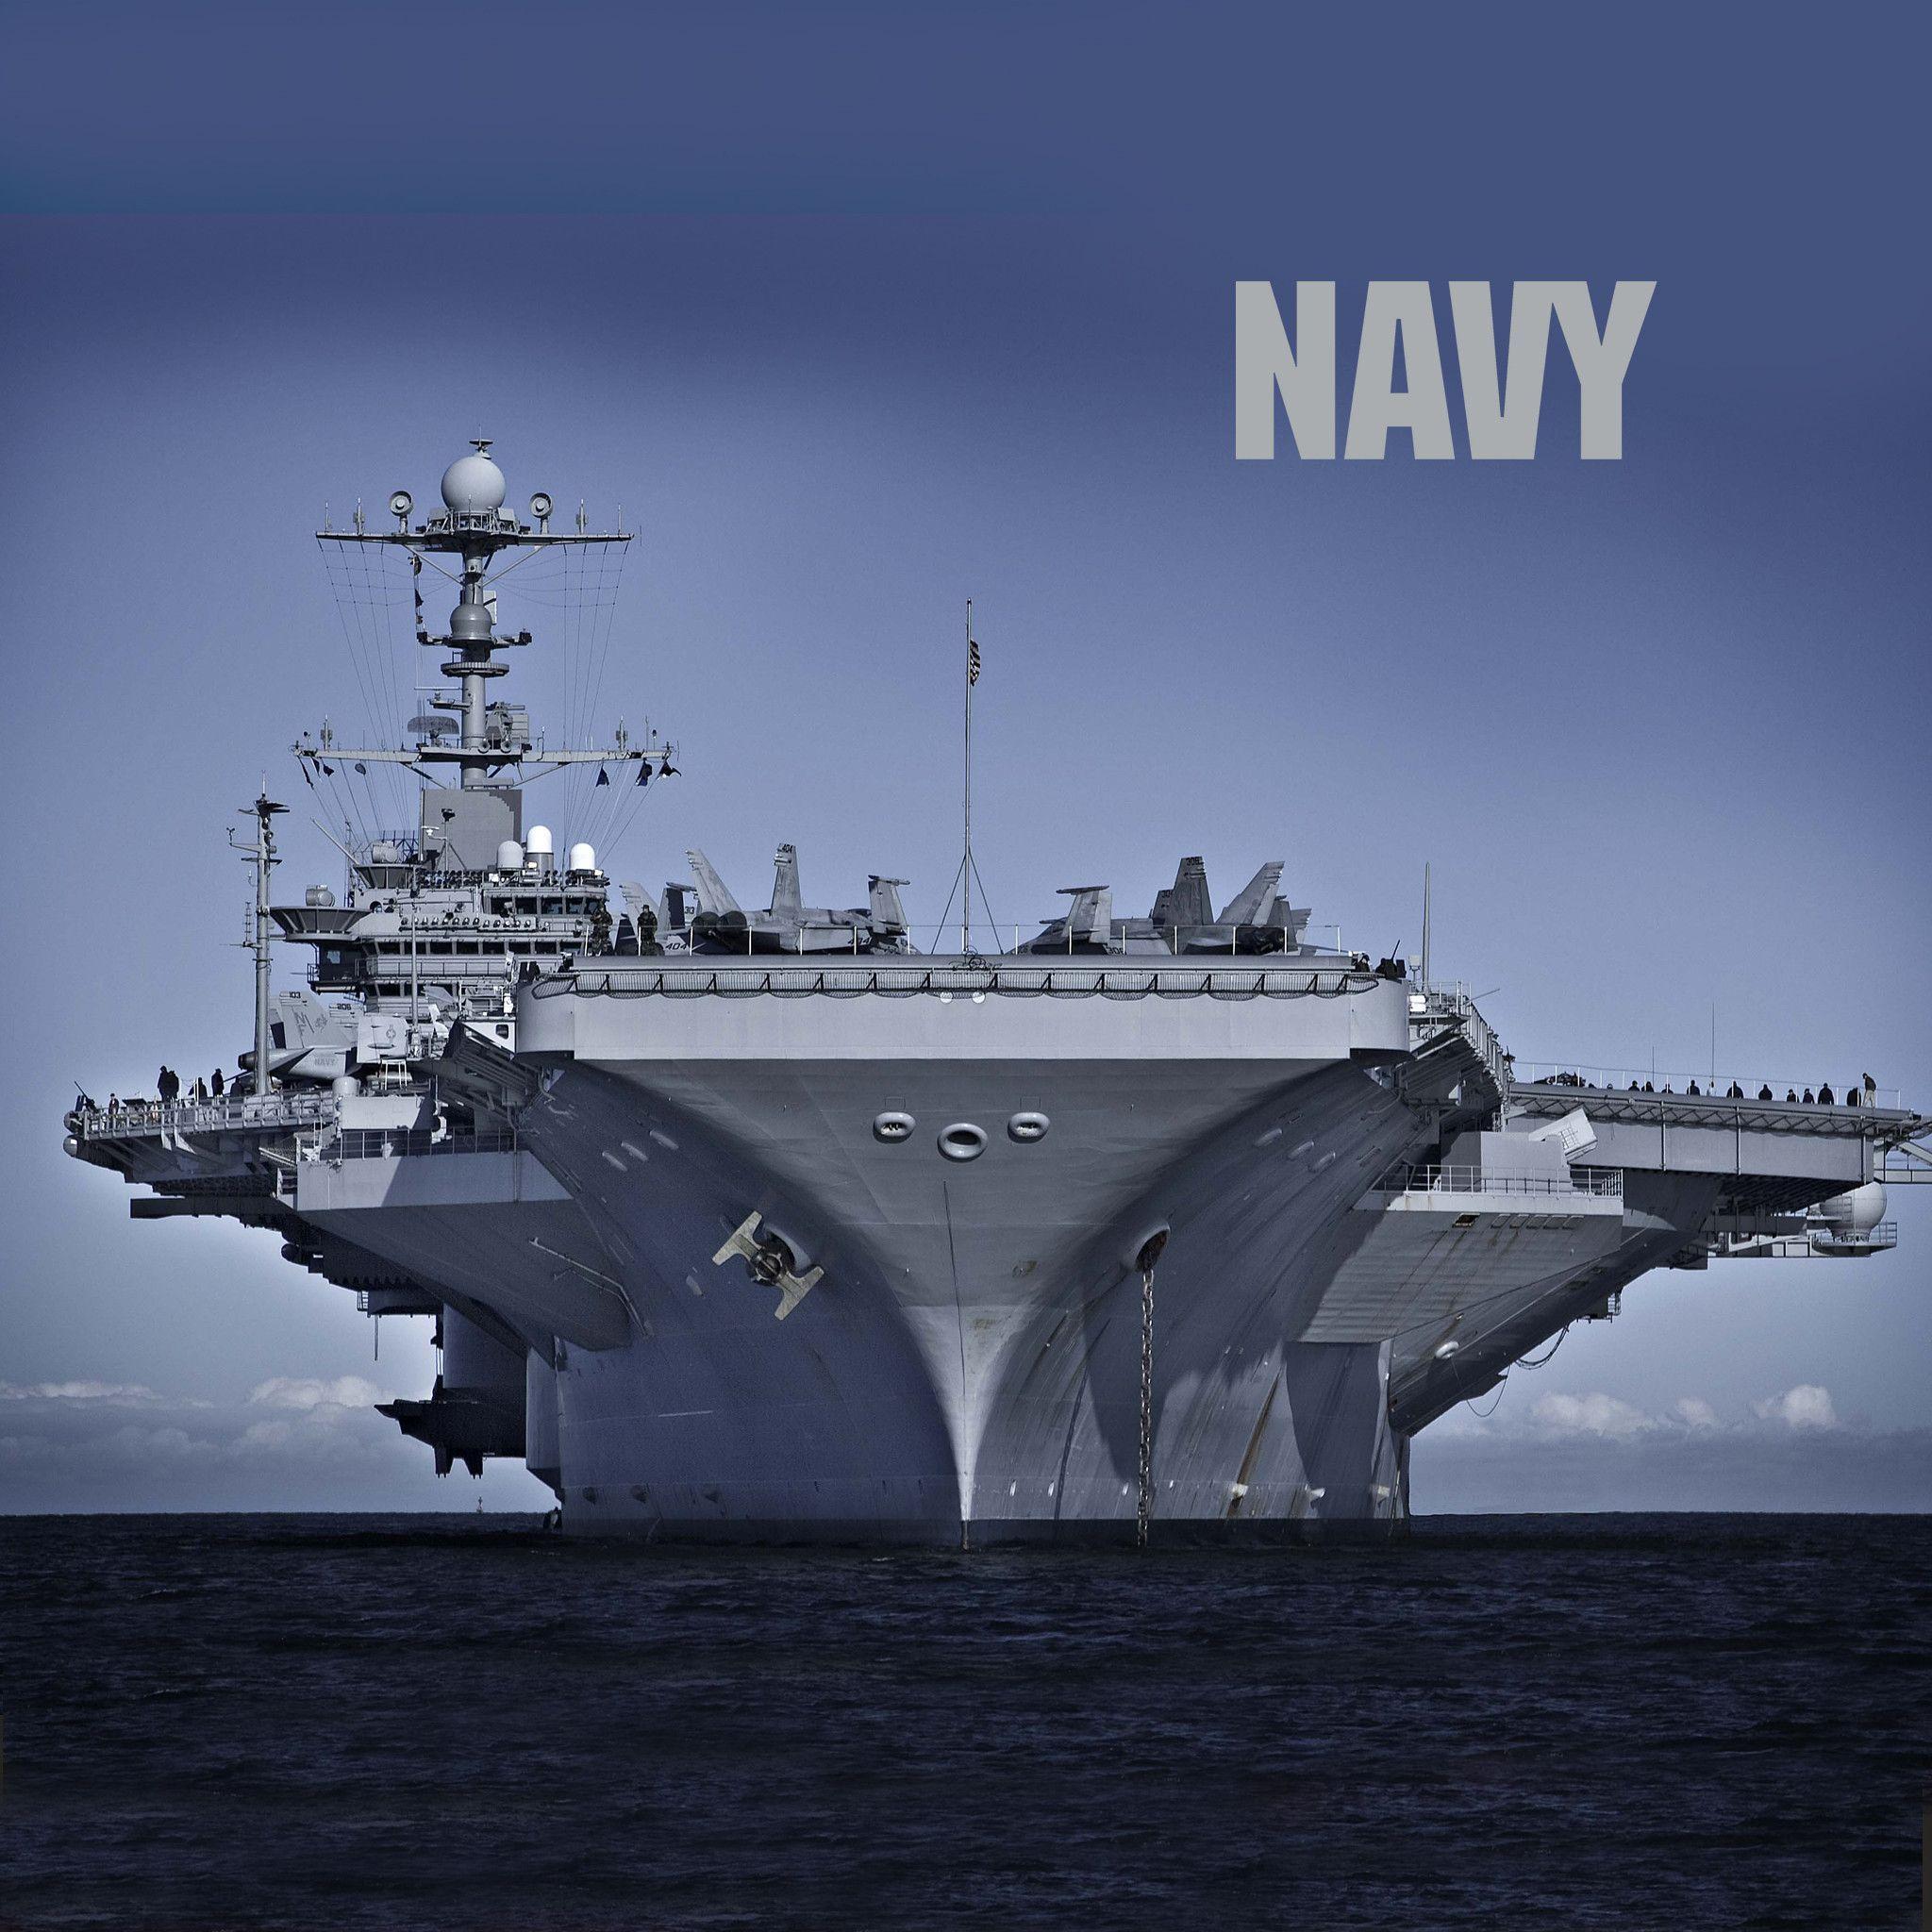 Indian Navy Wallpaper Free Indian Navy Background